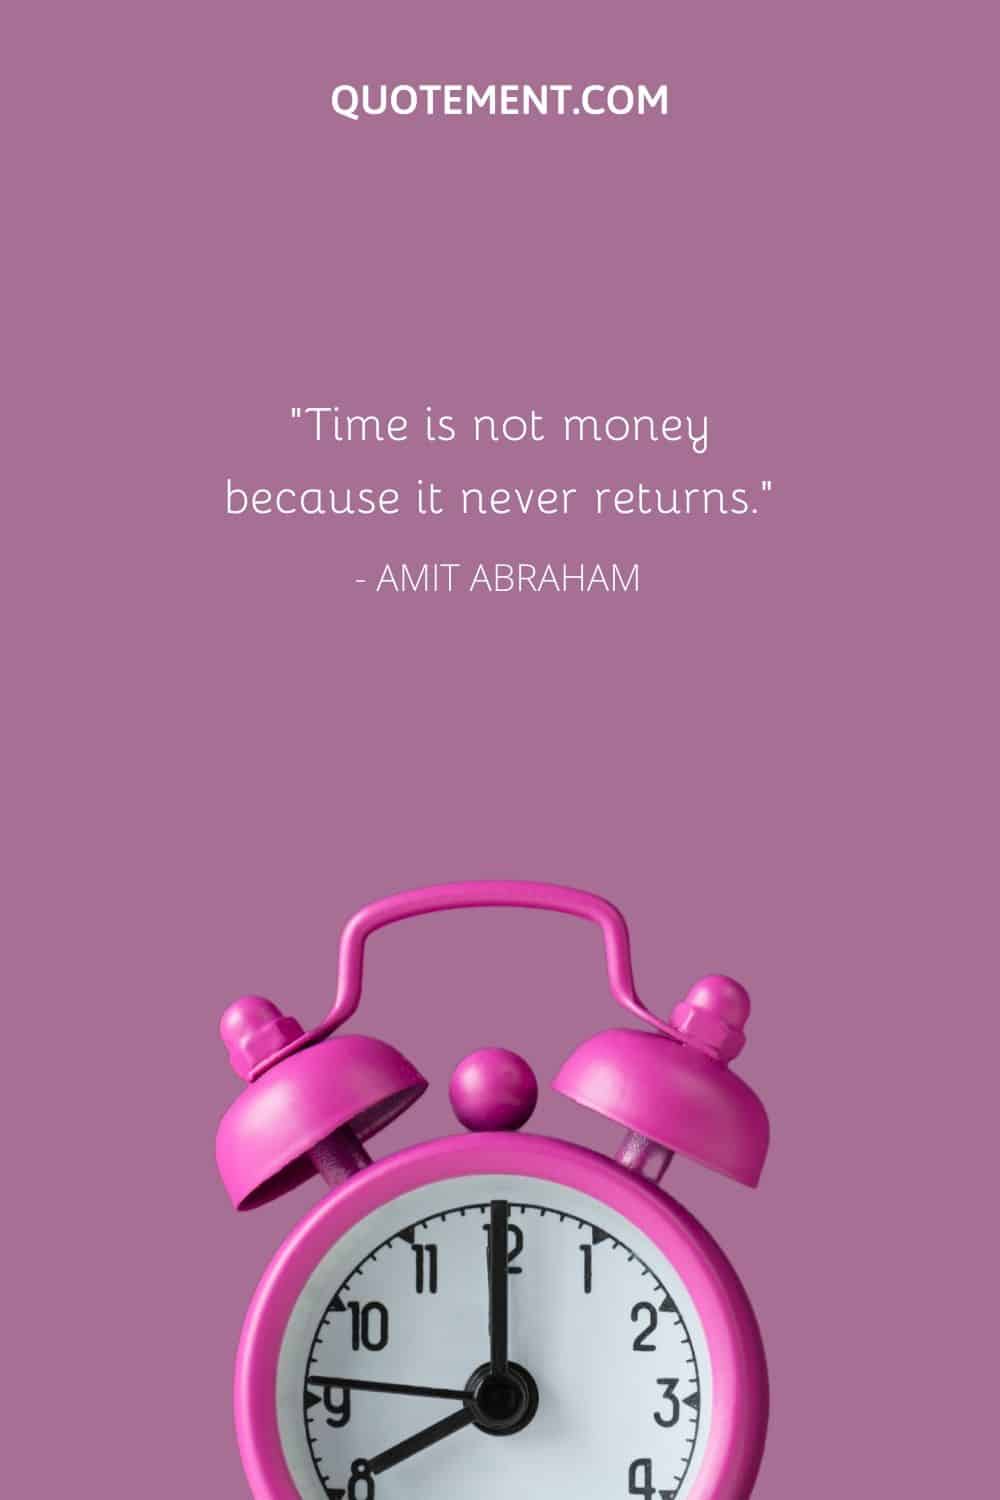 Time is not money because it never returns